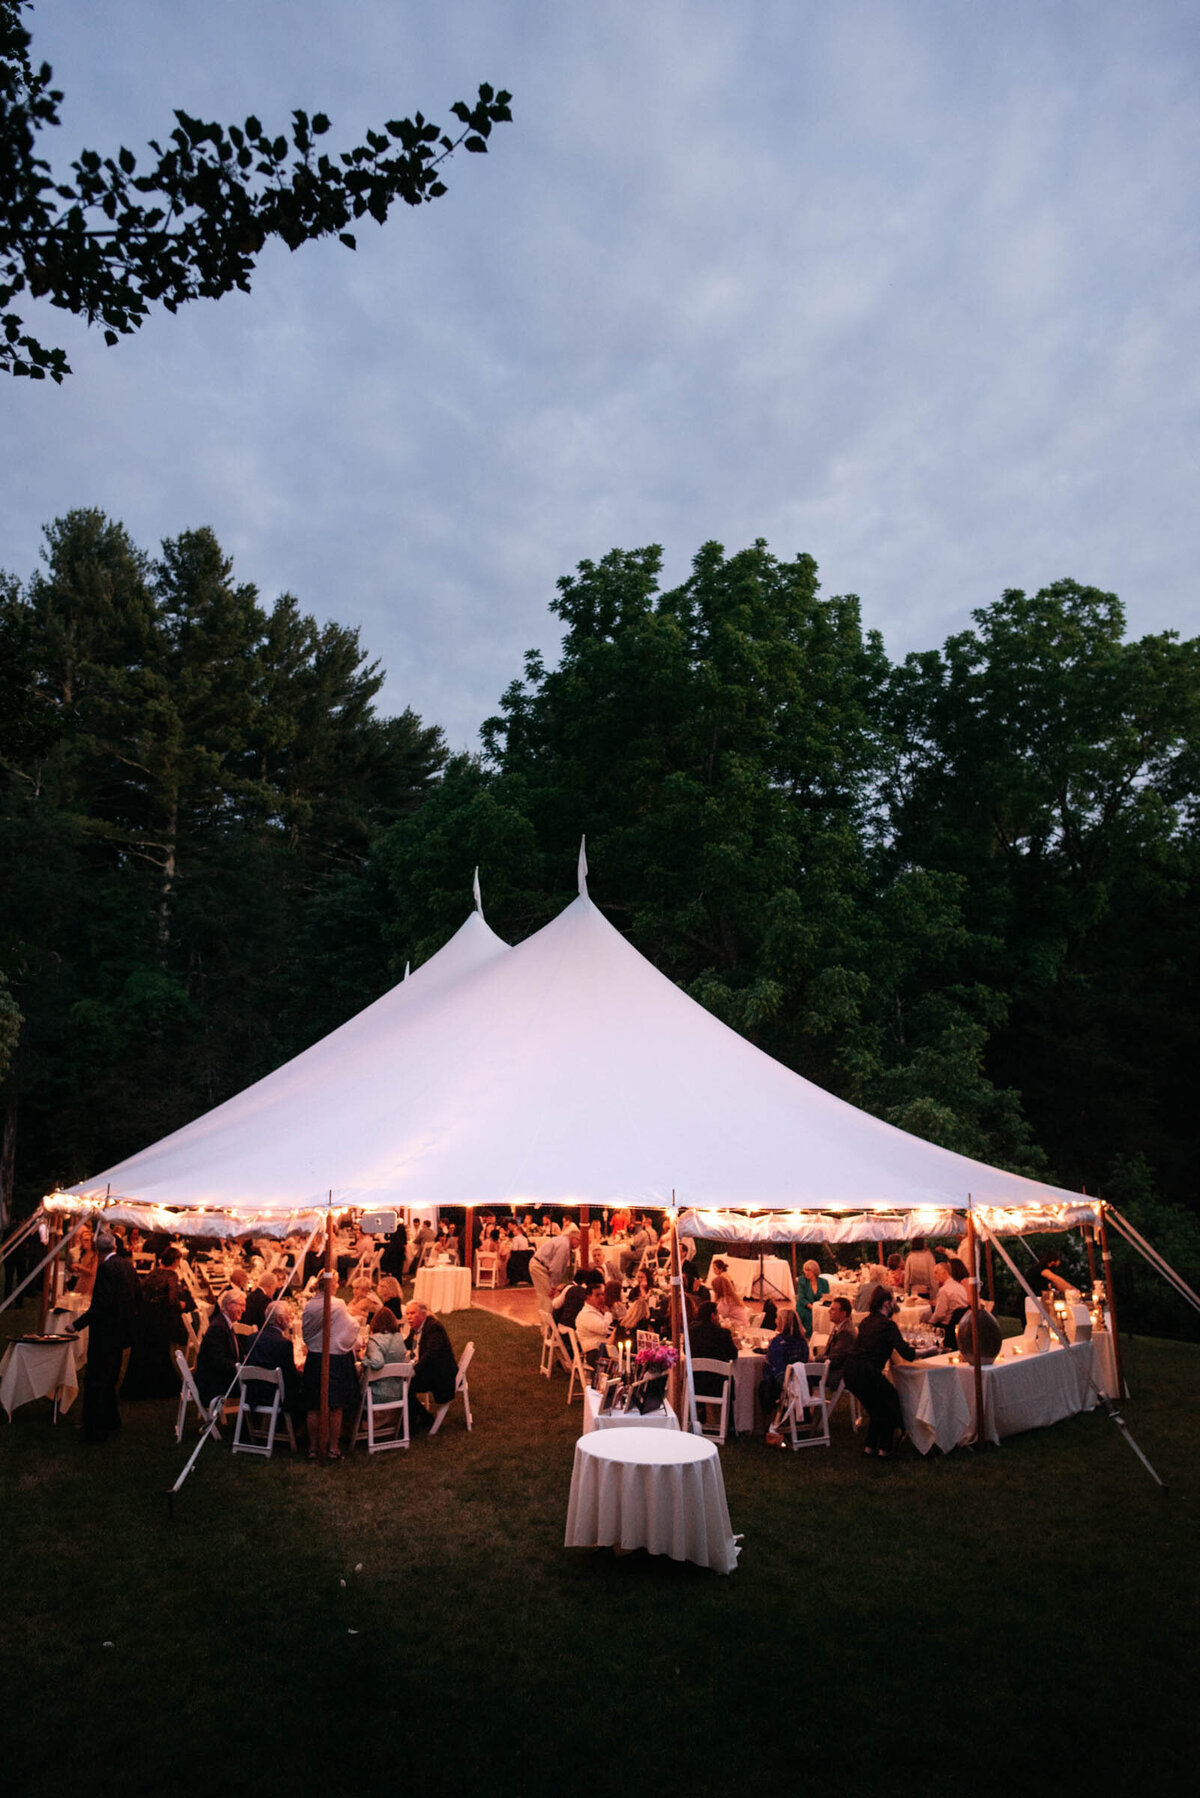 tented wedding glowing in the evening